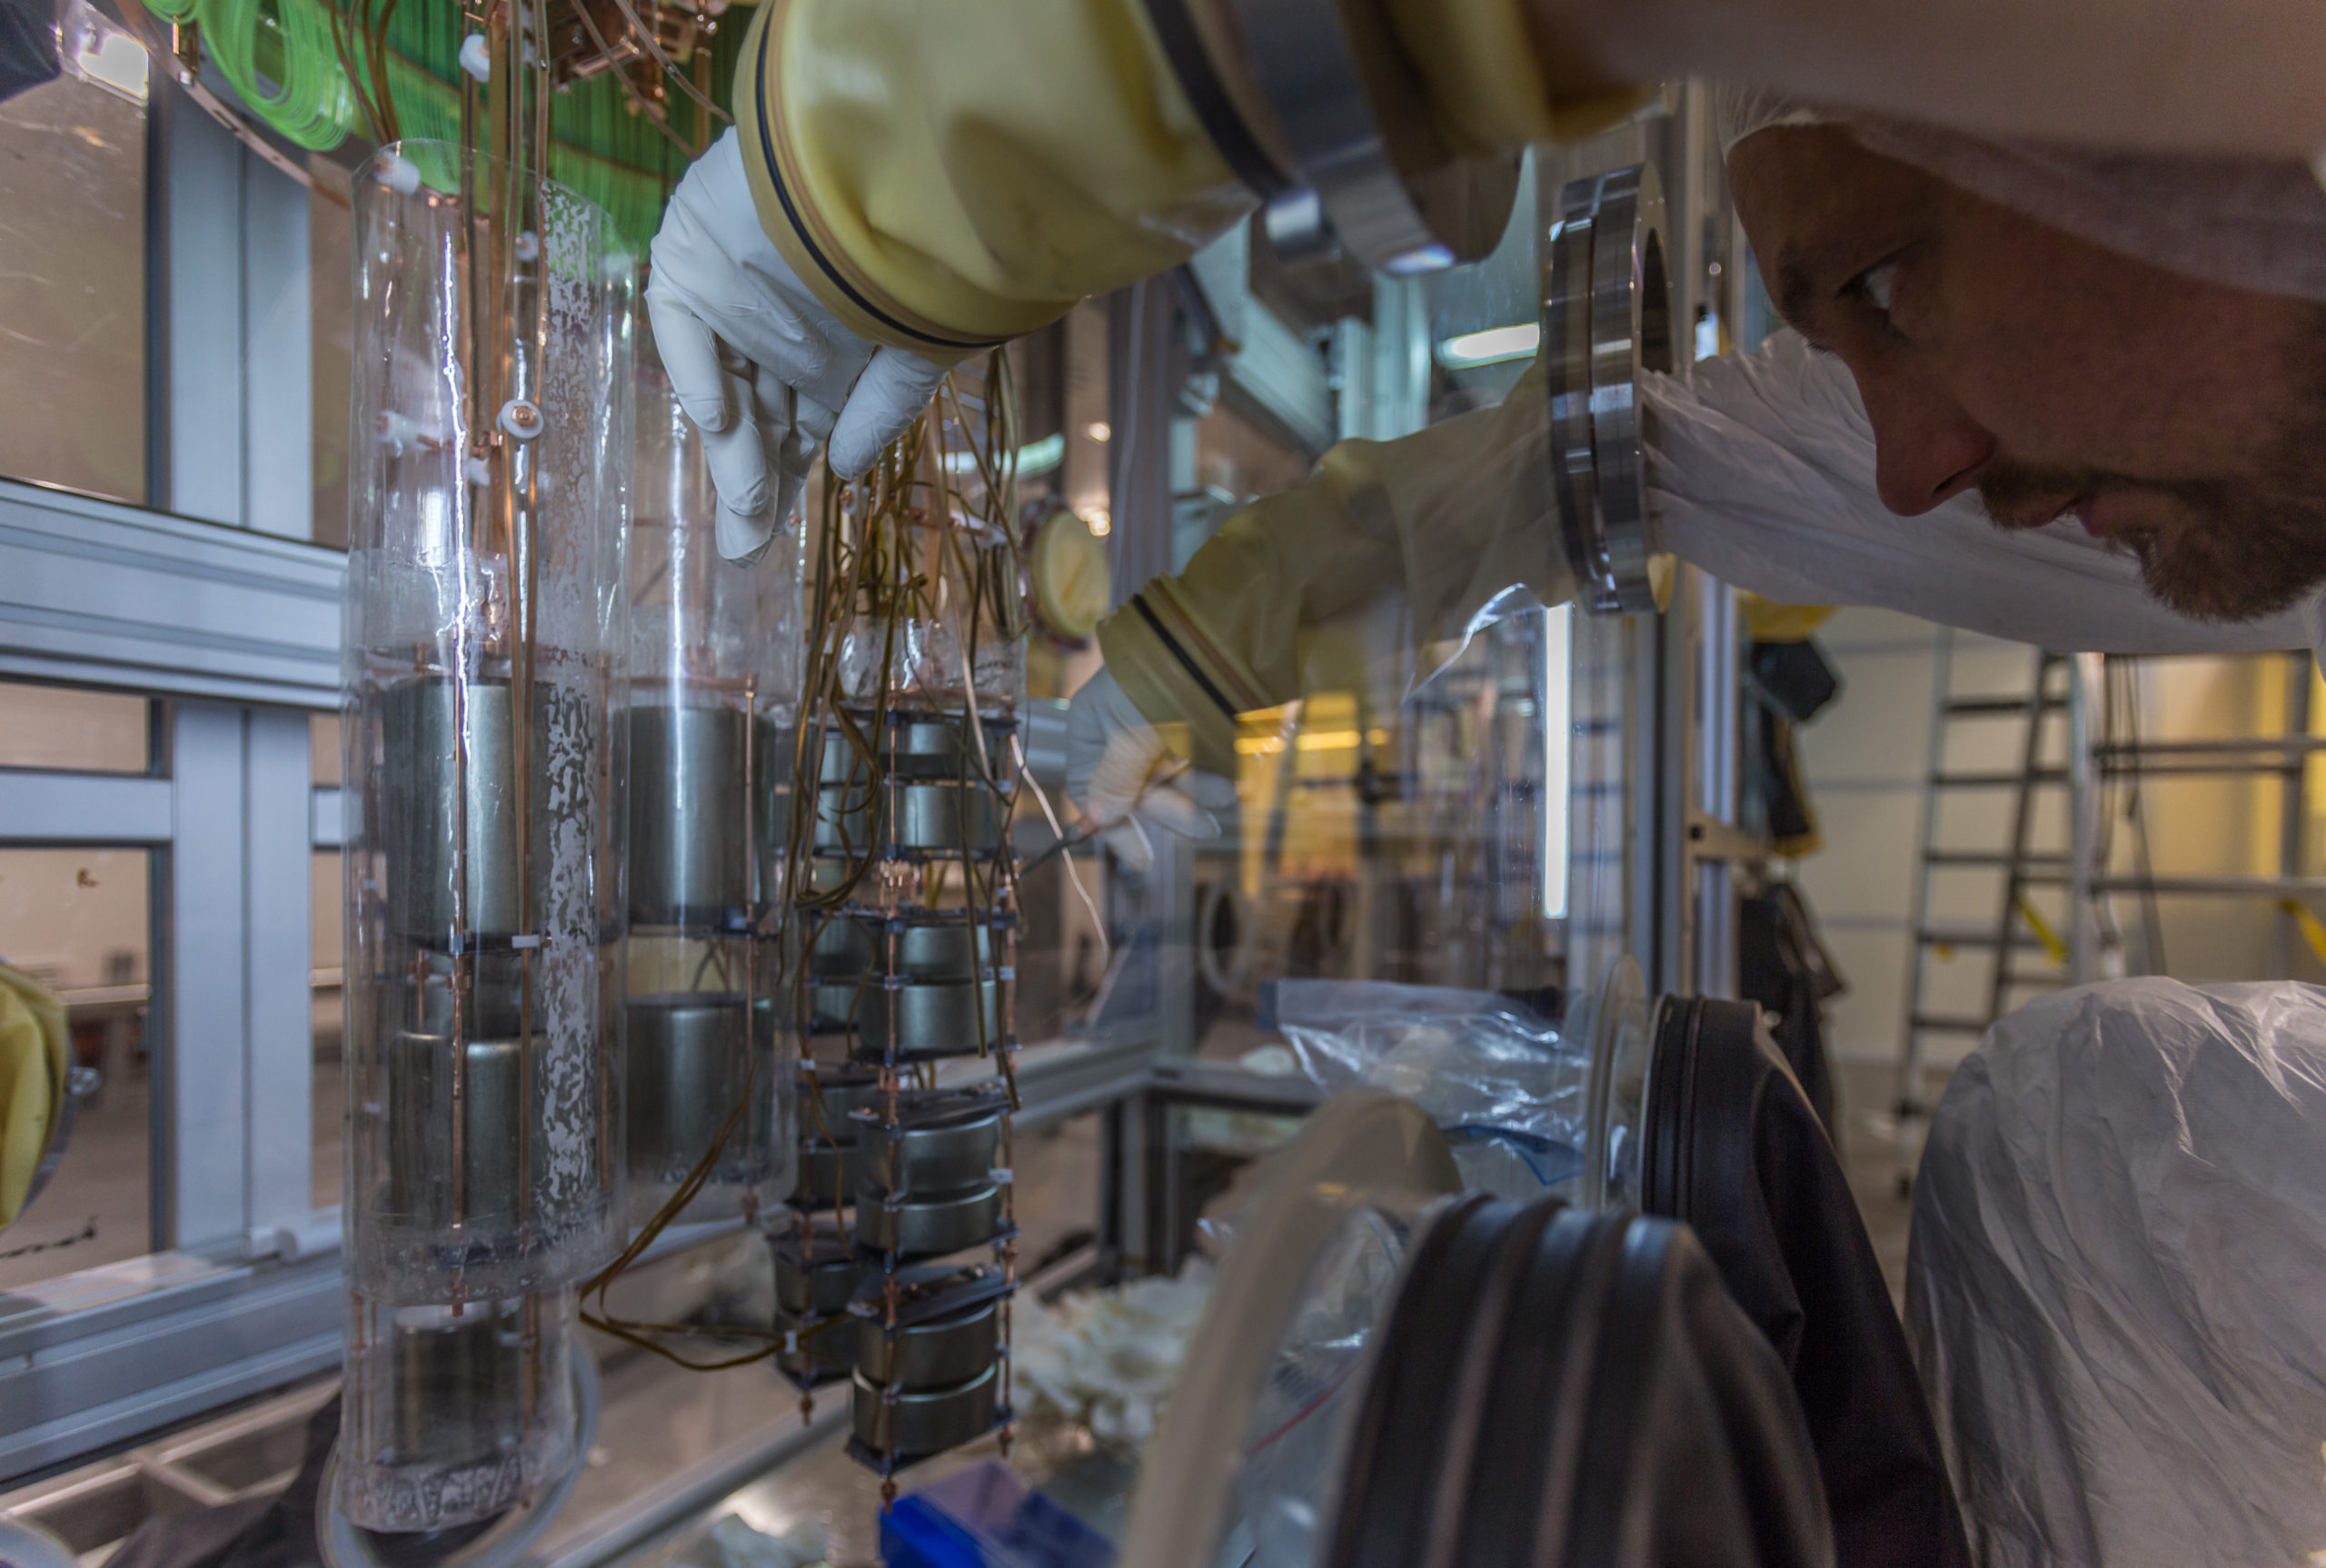 Scientists Are Getting Closer To Understanding Where All The Antimatter Has Gone